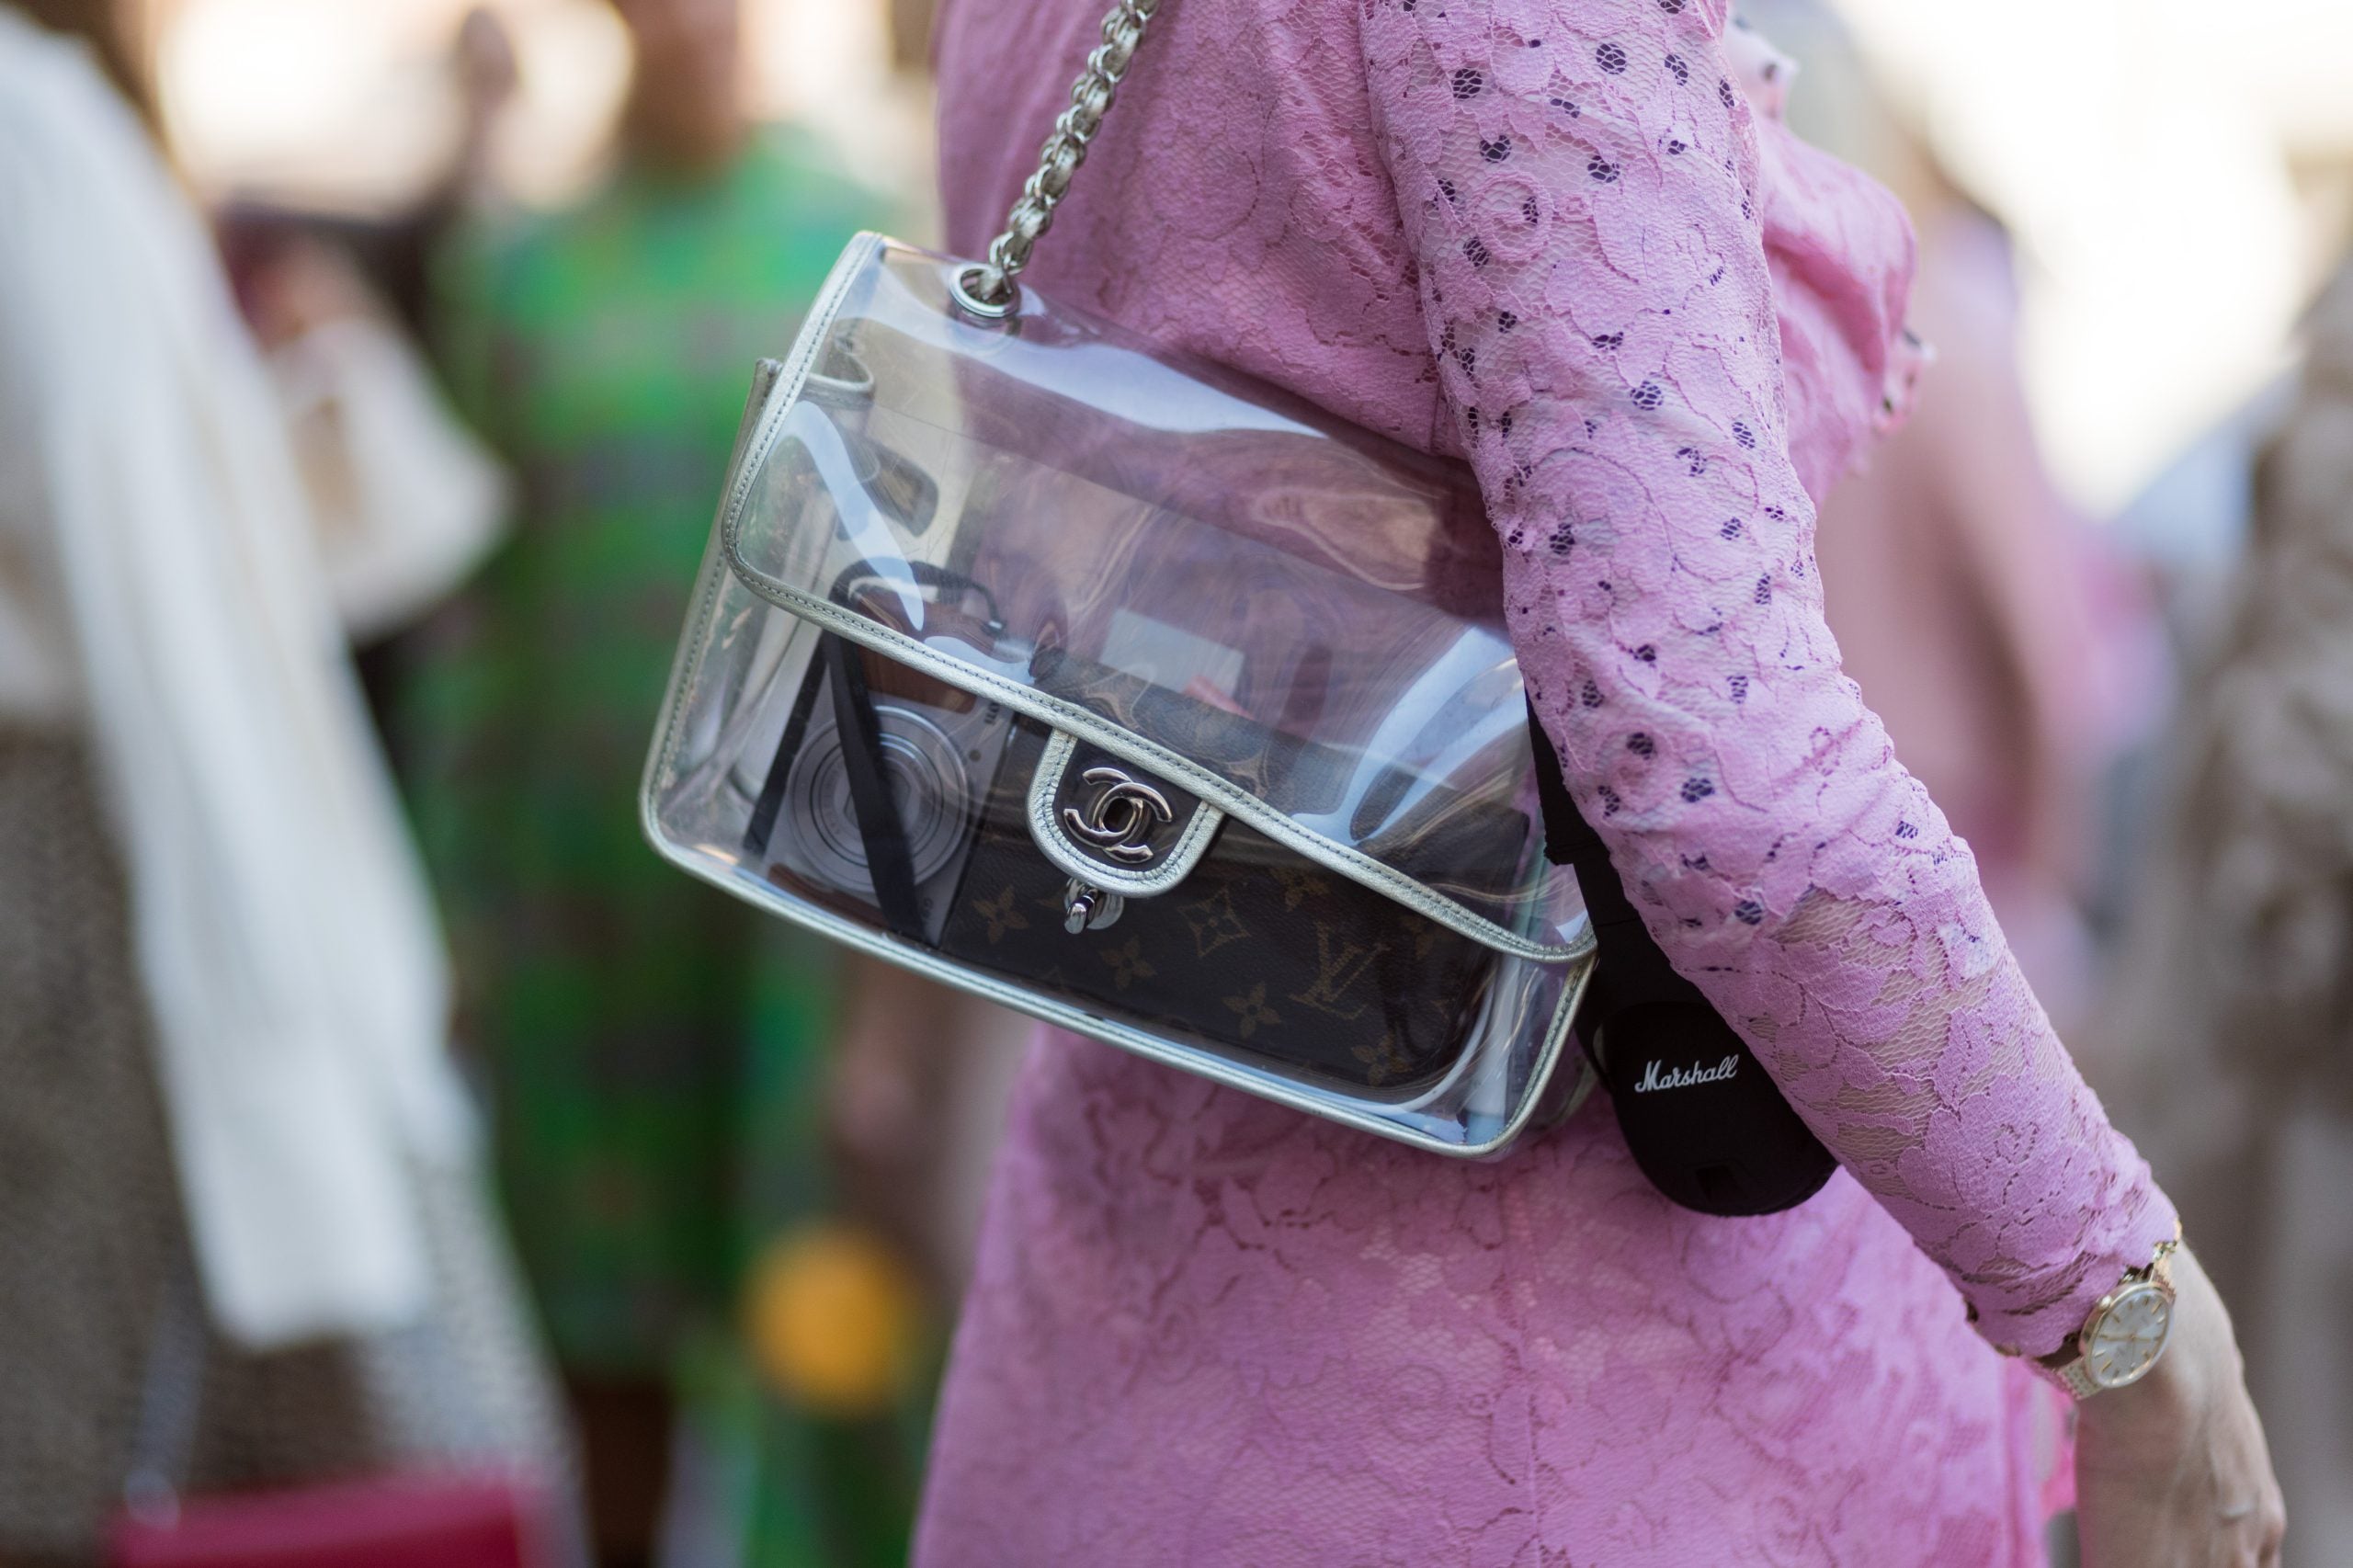 Stylish & Affordable Clear Bags You Can Take to the Stadium